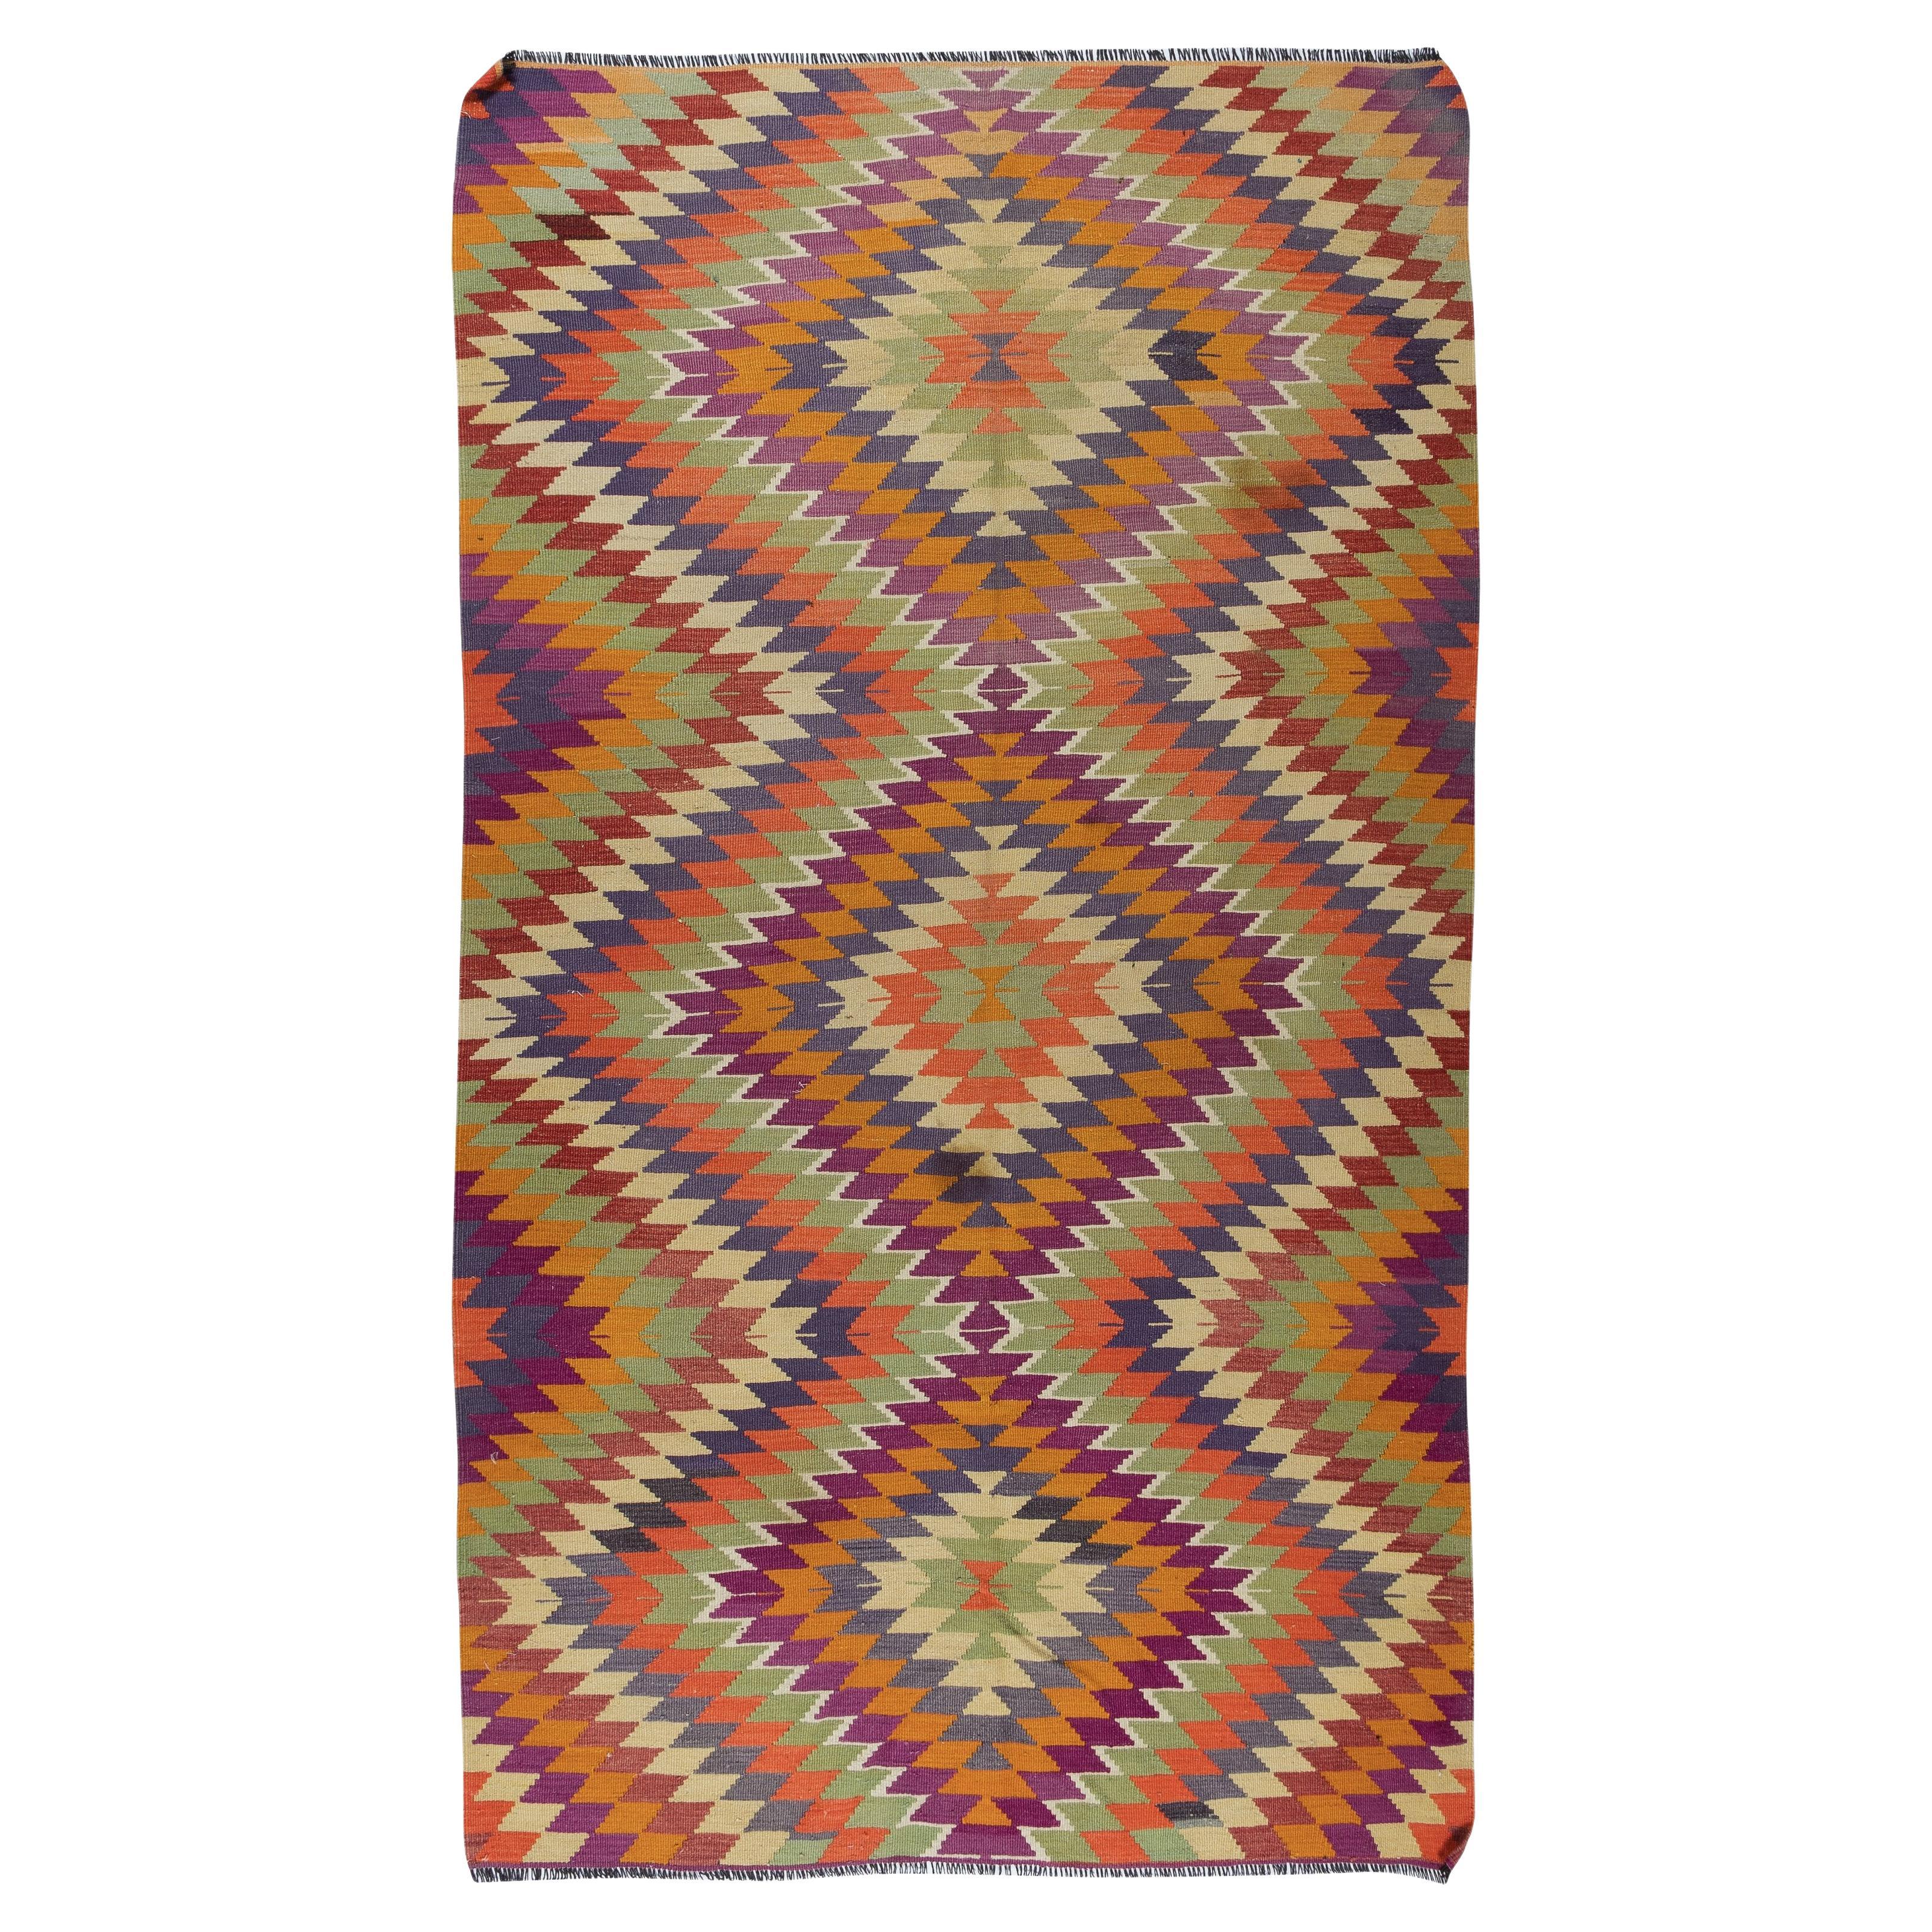 5.8x10 Ft Multicolored Handmade Turkish Wool Kilim, One of a Kind Flat-Weave Rug For Sale